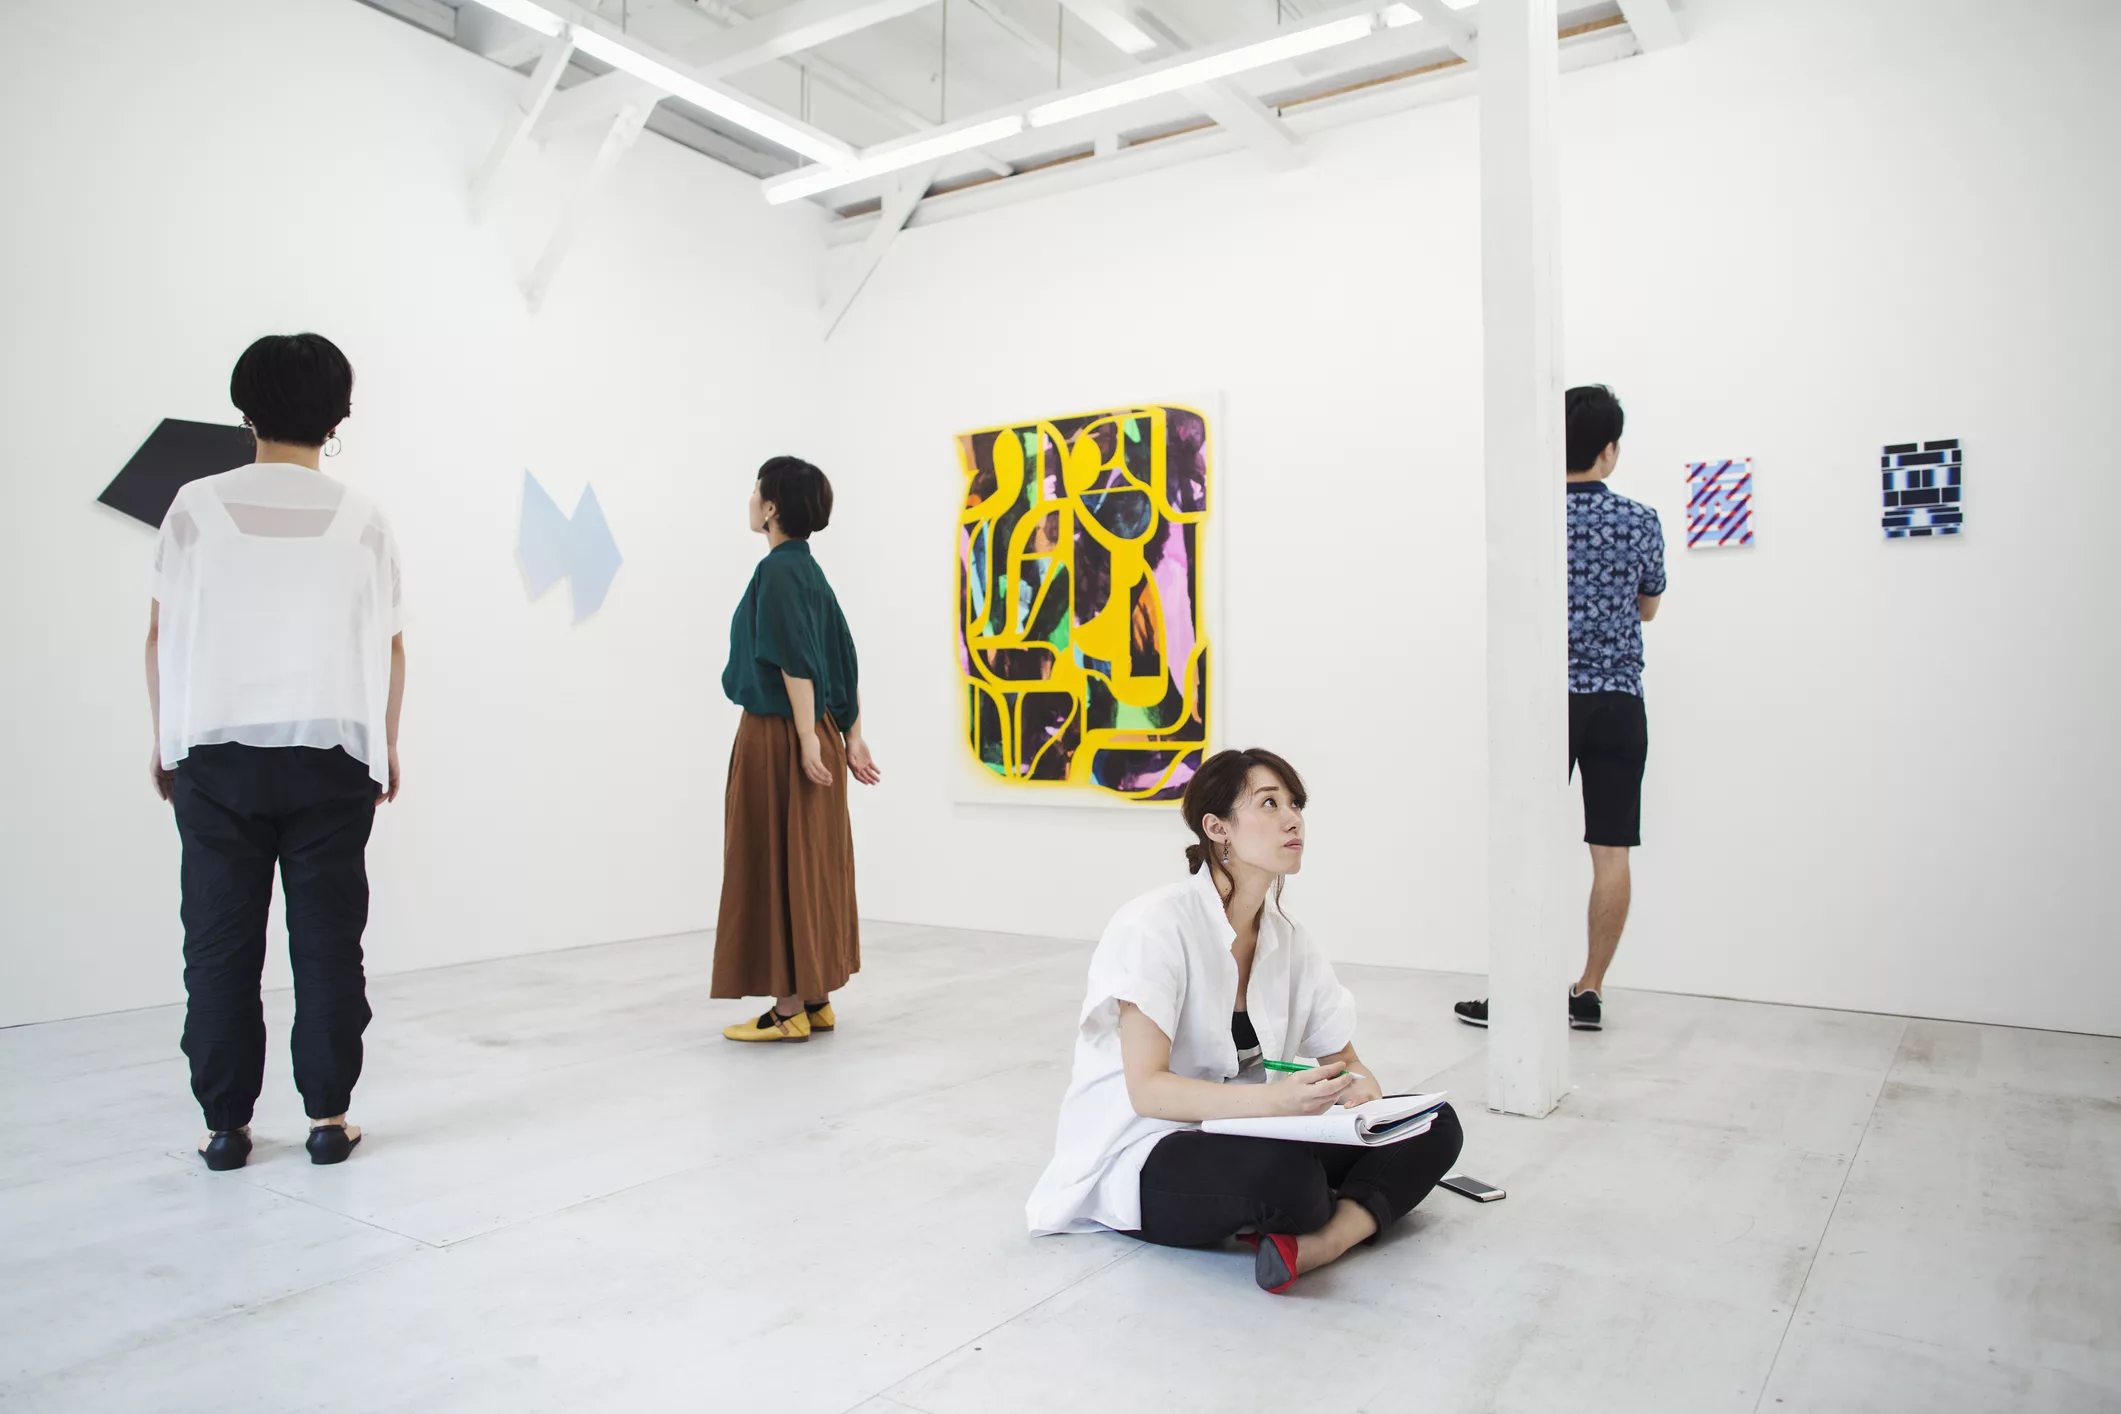 woman-with-black-hair-sitting-on-floor-in-art-gallery-with-pen-and-paper-looking-at-modern-painting-three-people-standing-in-front-of-artworks